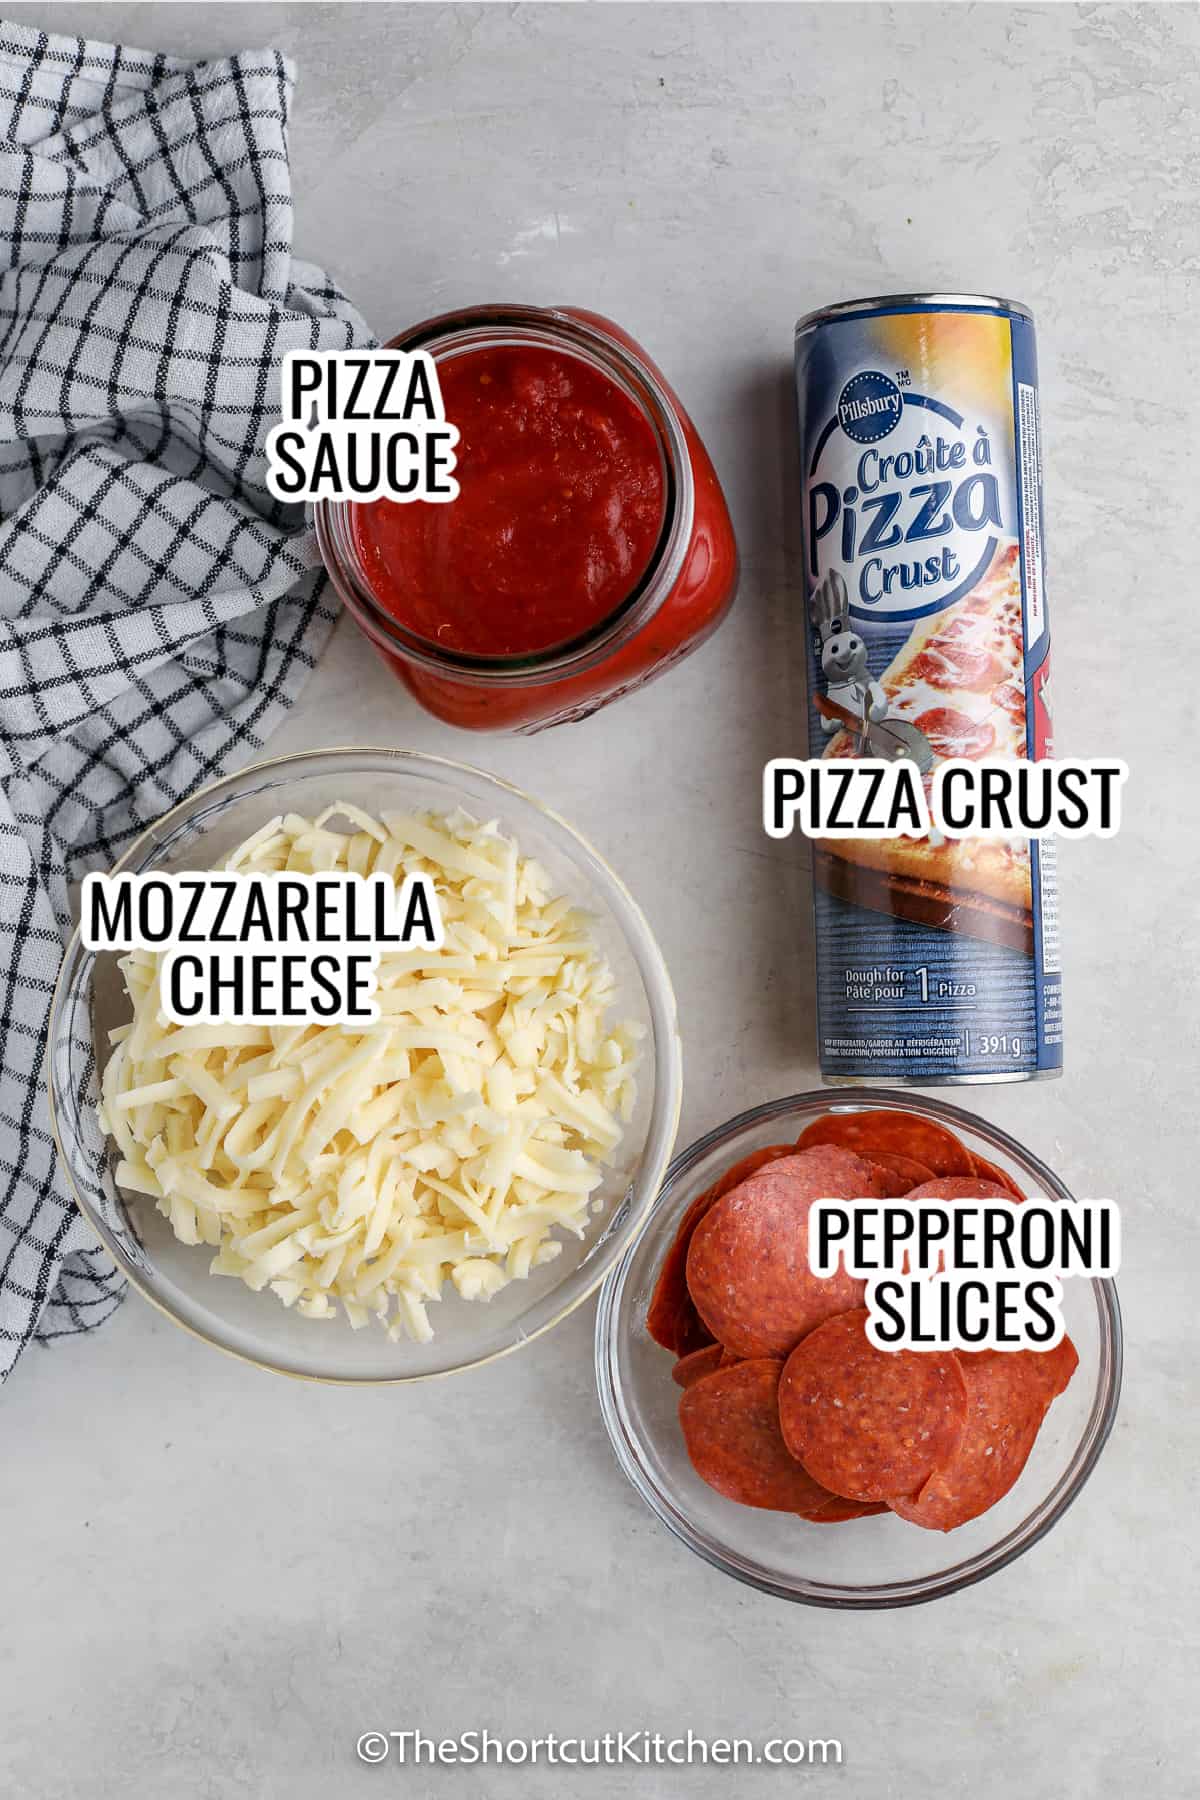 ingredients assembled to make pizza roll up, including pizza sauce, dough, mozzarella cheese, and pepperoni slices